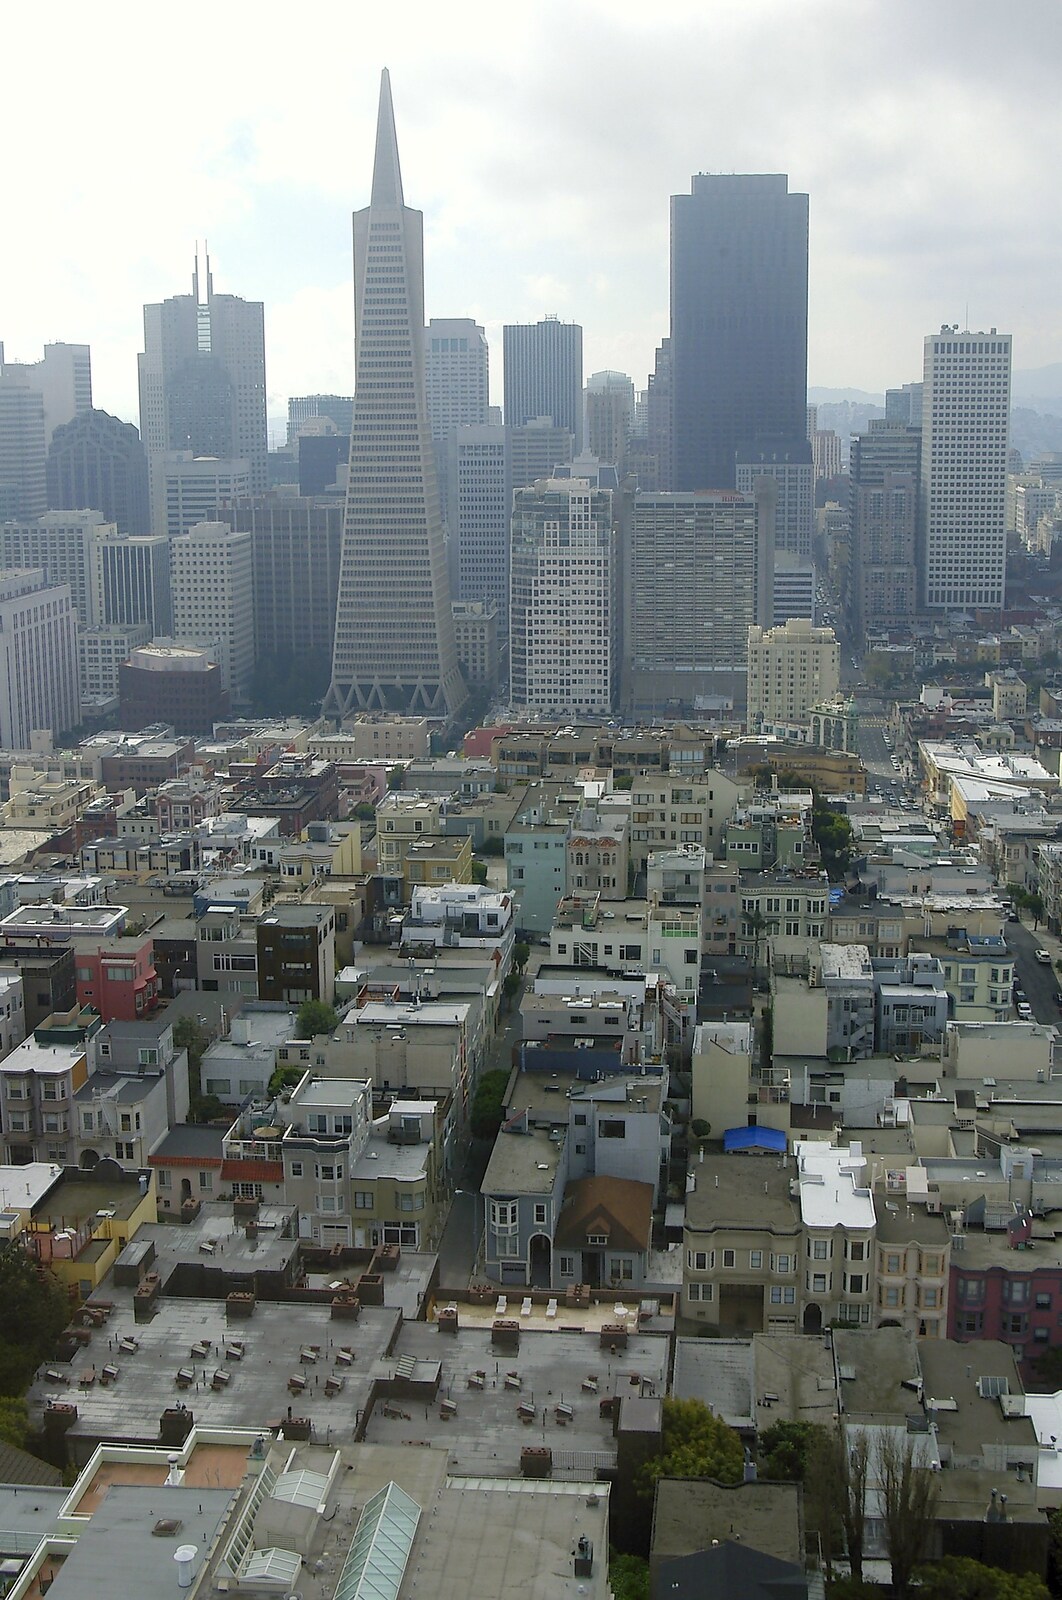 A view of the Transamerica Building from Chinatown, Telegraph Hill and Fisherman's Wharf, San Francisco, California, US - 11th March 2006